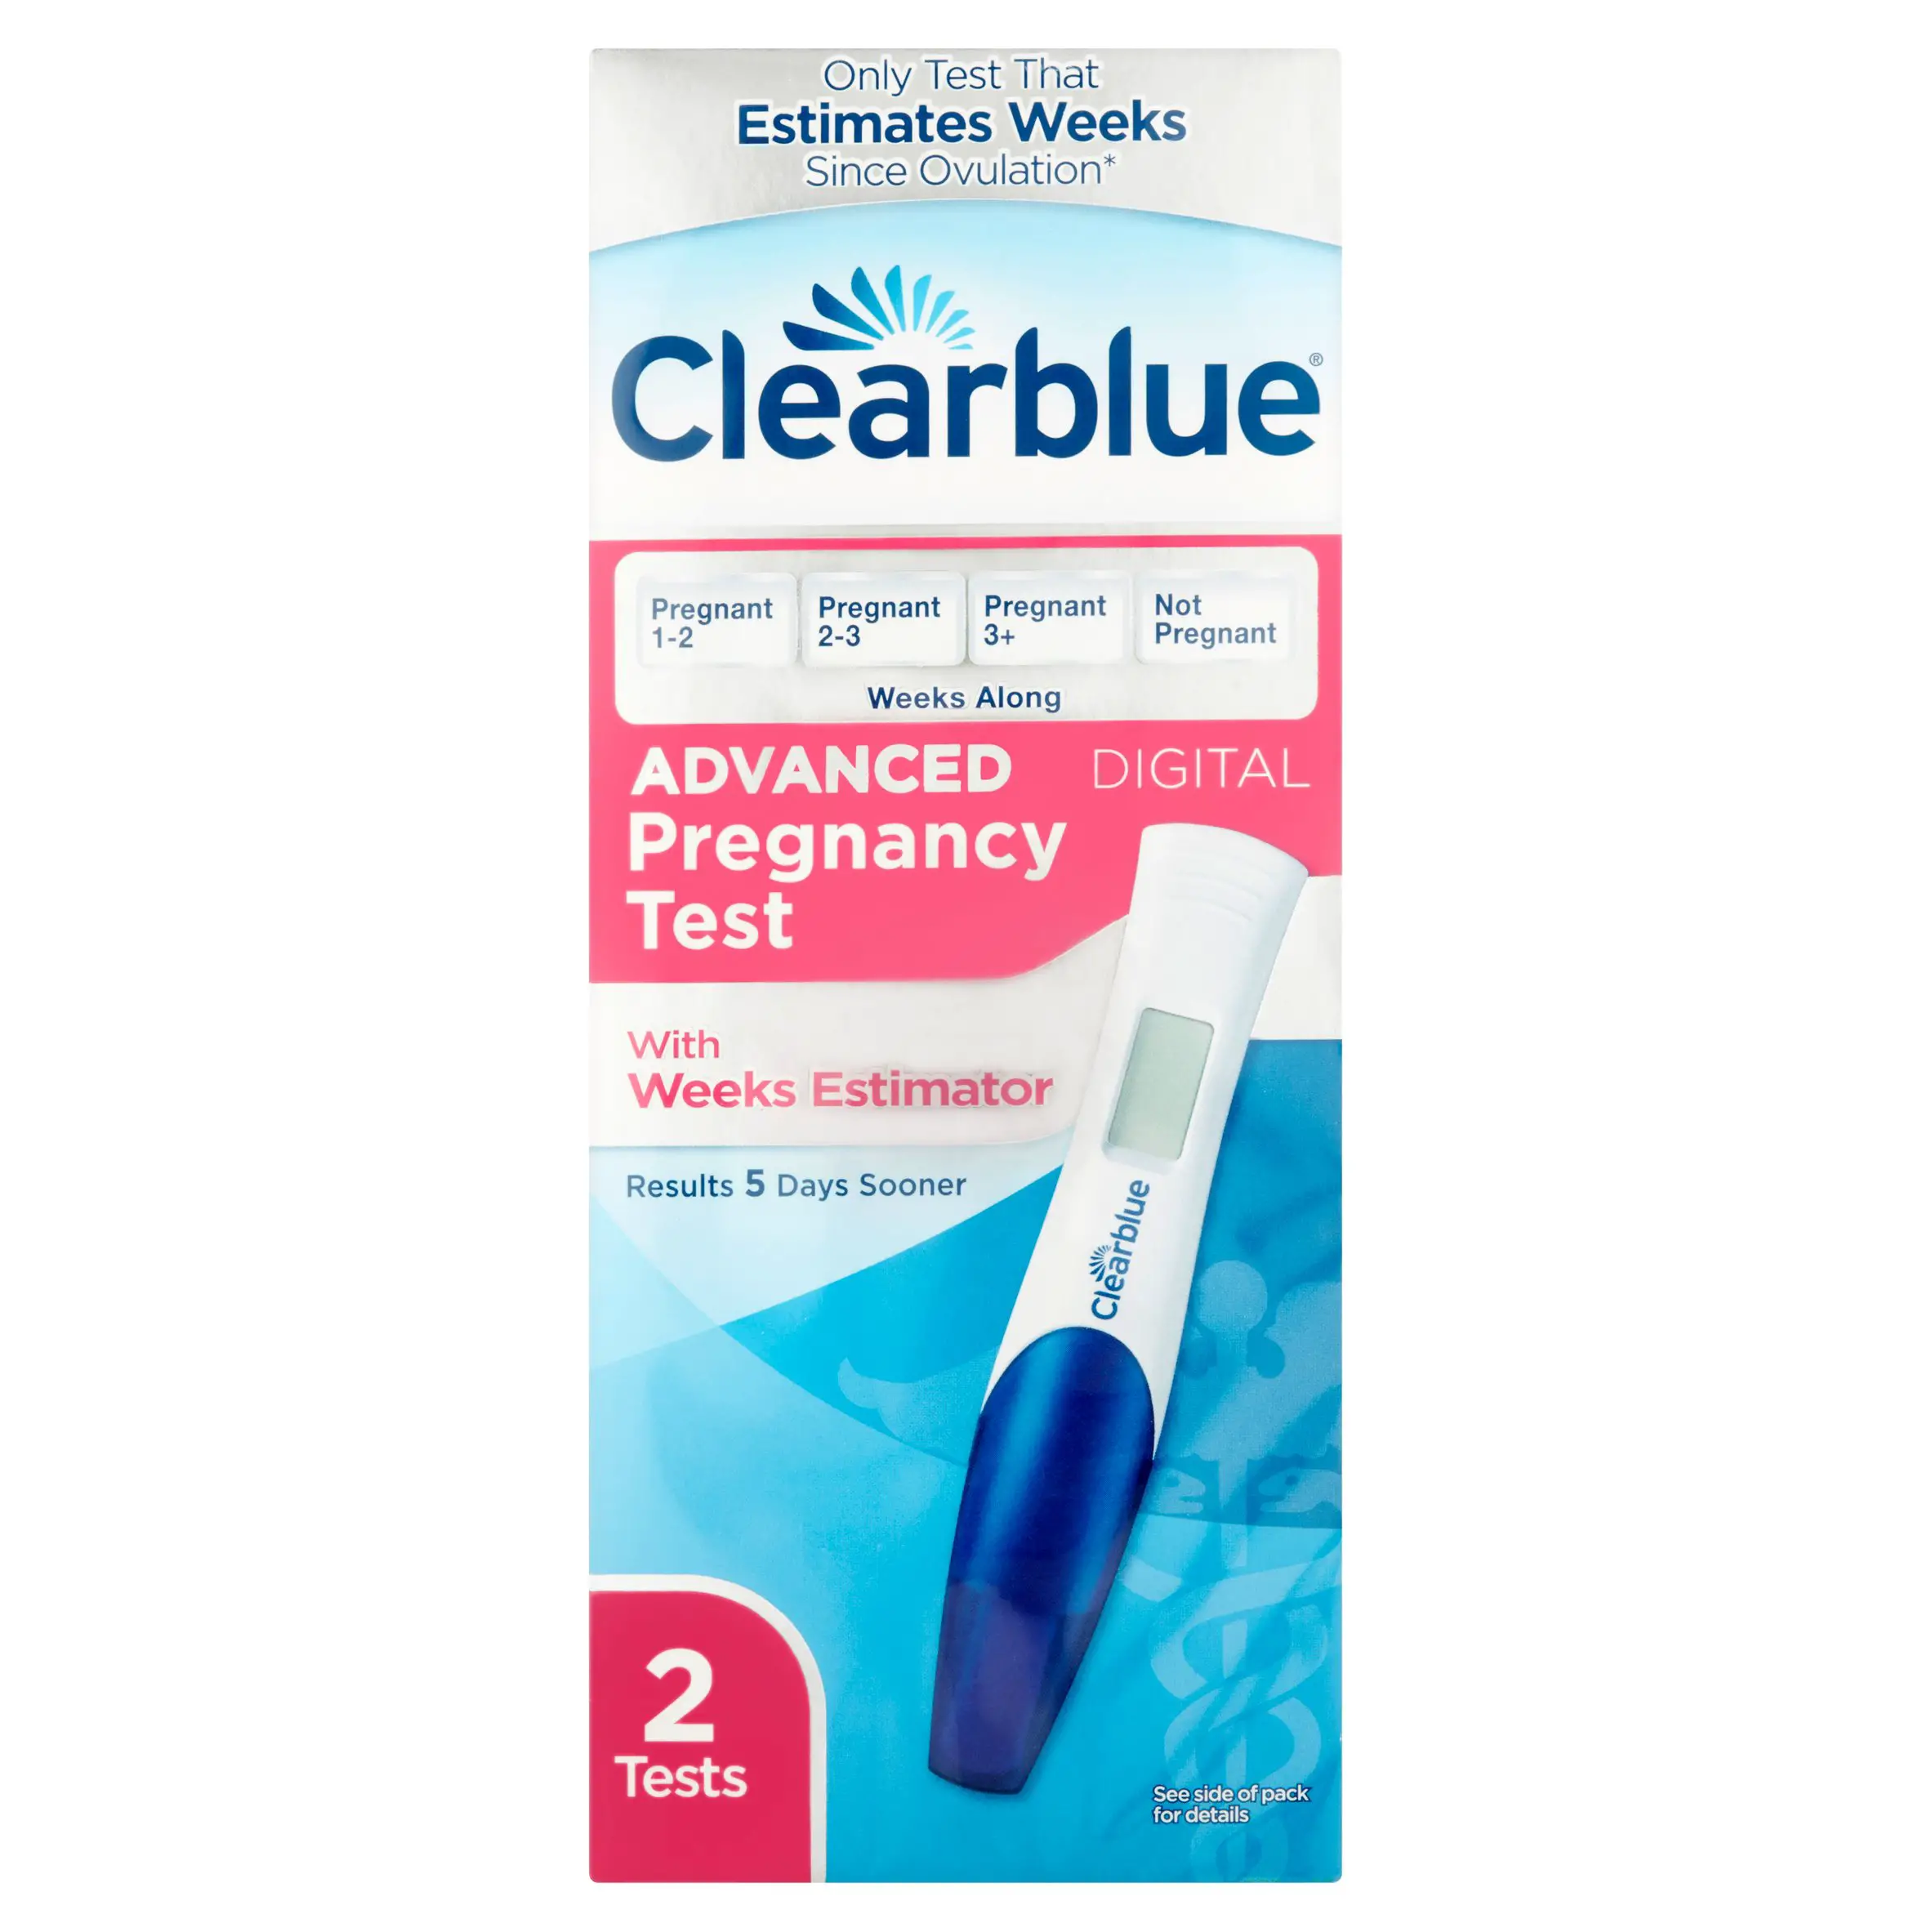 Clearblue Advanced pregnancy test